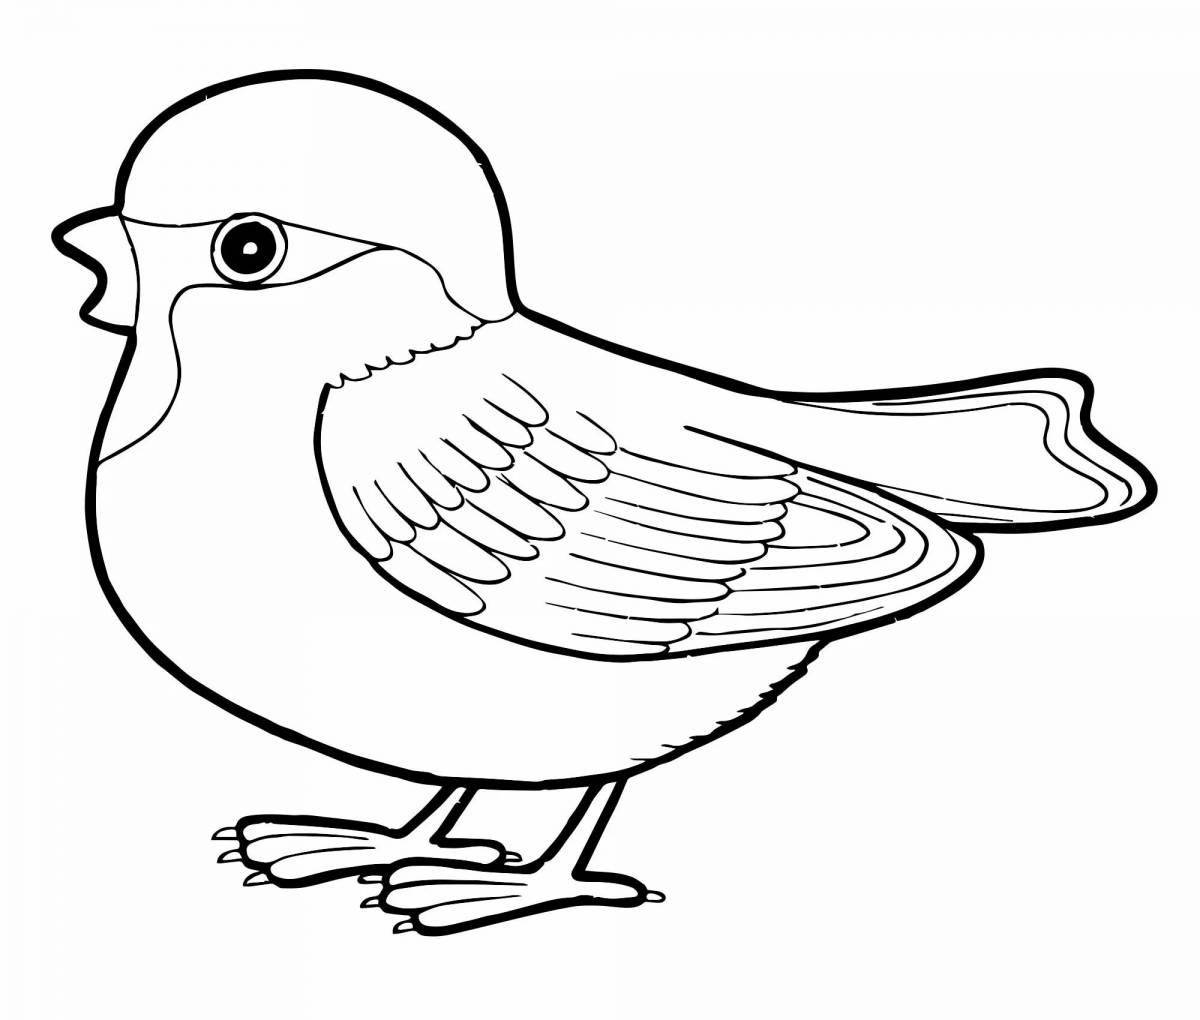 Colourful tit coloring book for 2-3 year olds